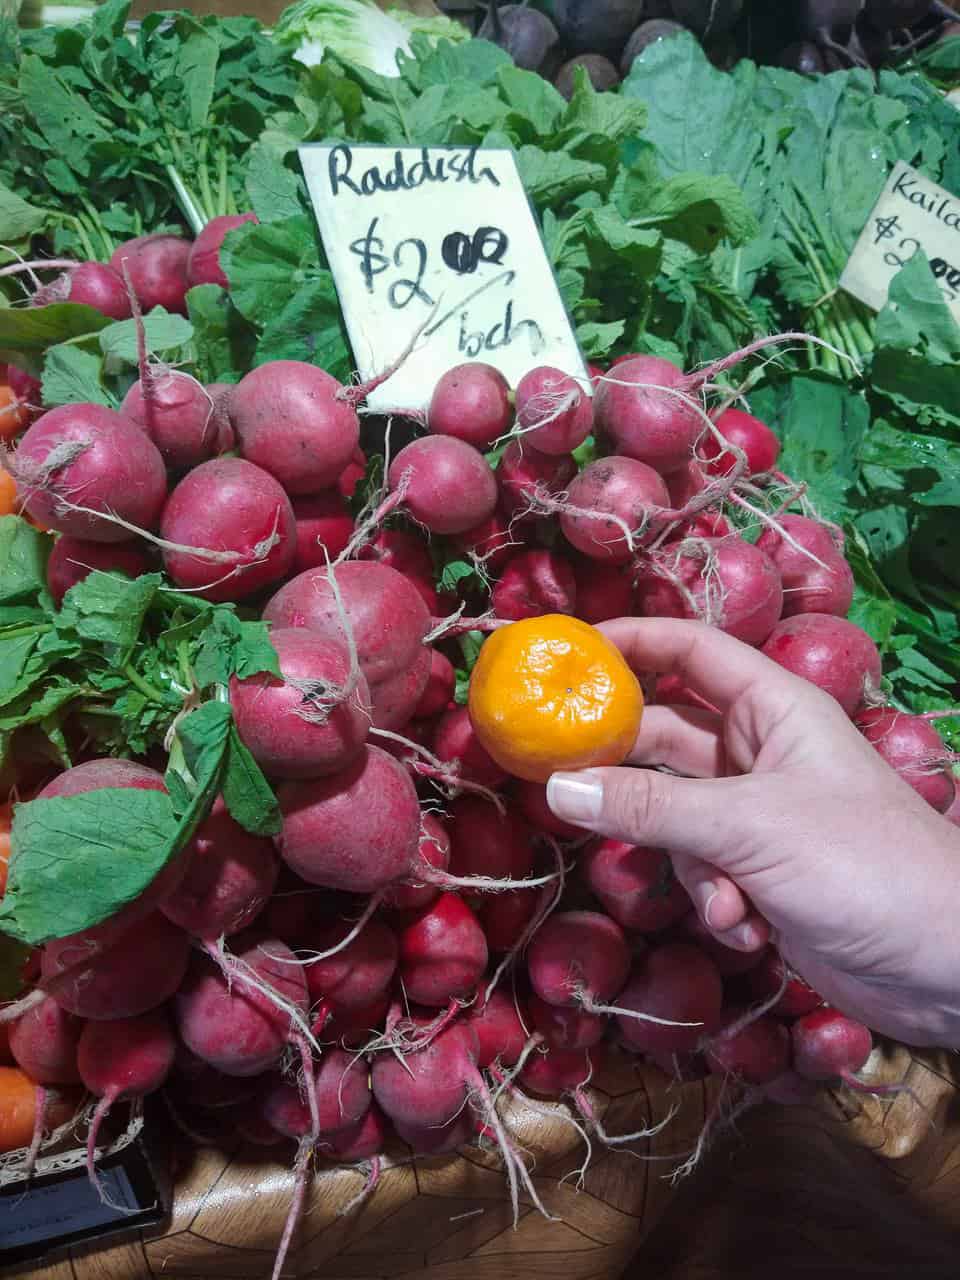 Radishes at Rusty's Market in Cairns // Travel Mermaid